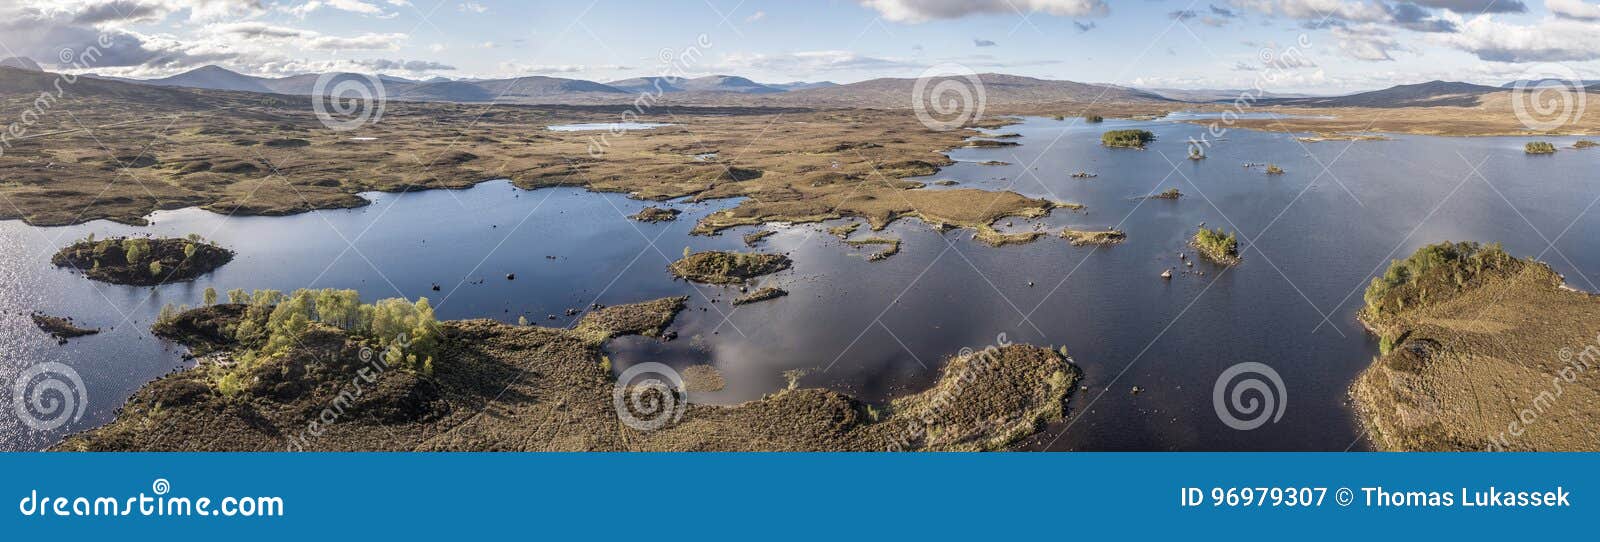 aerial view of the amazing landscape of rannoch moor